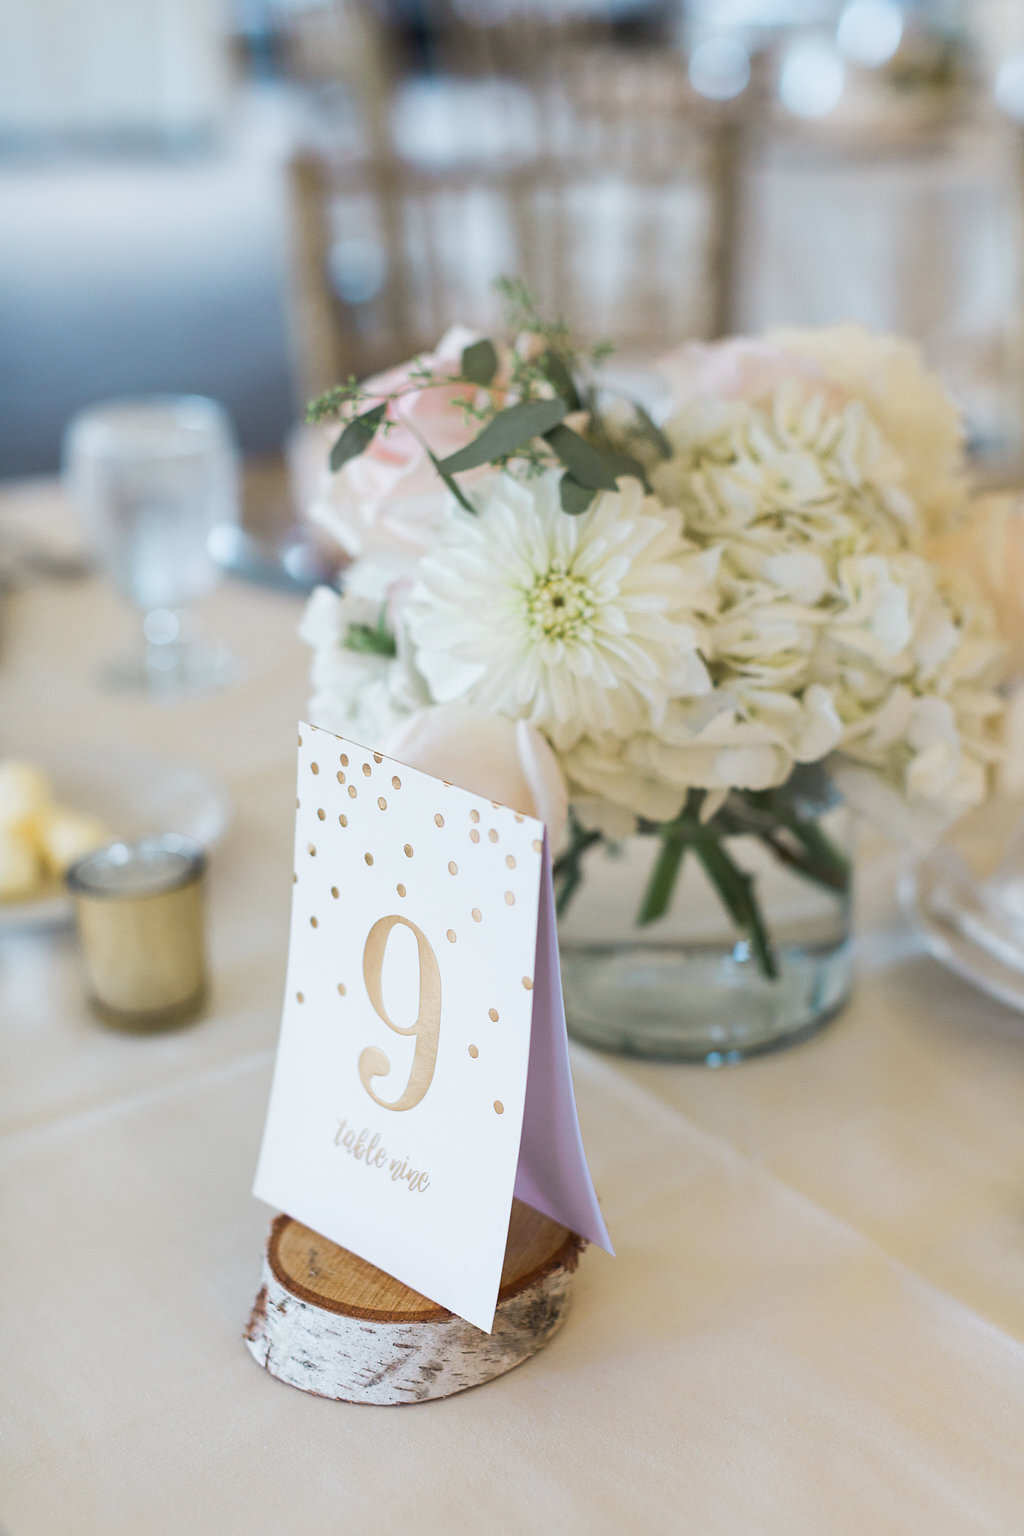 Short, full, Blush and White centerpieces